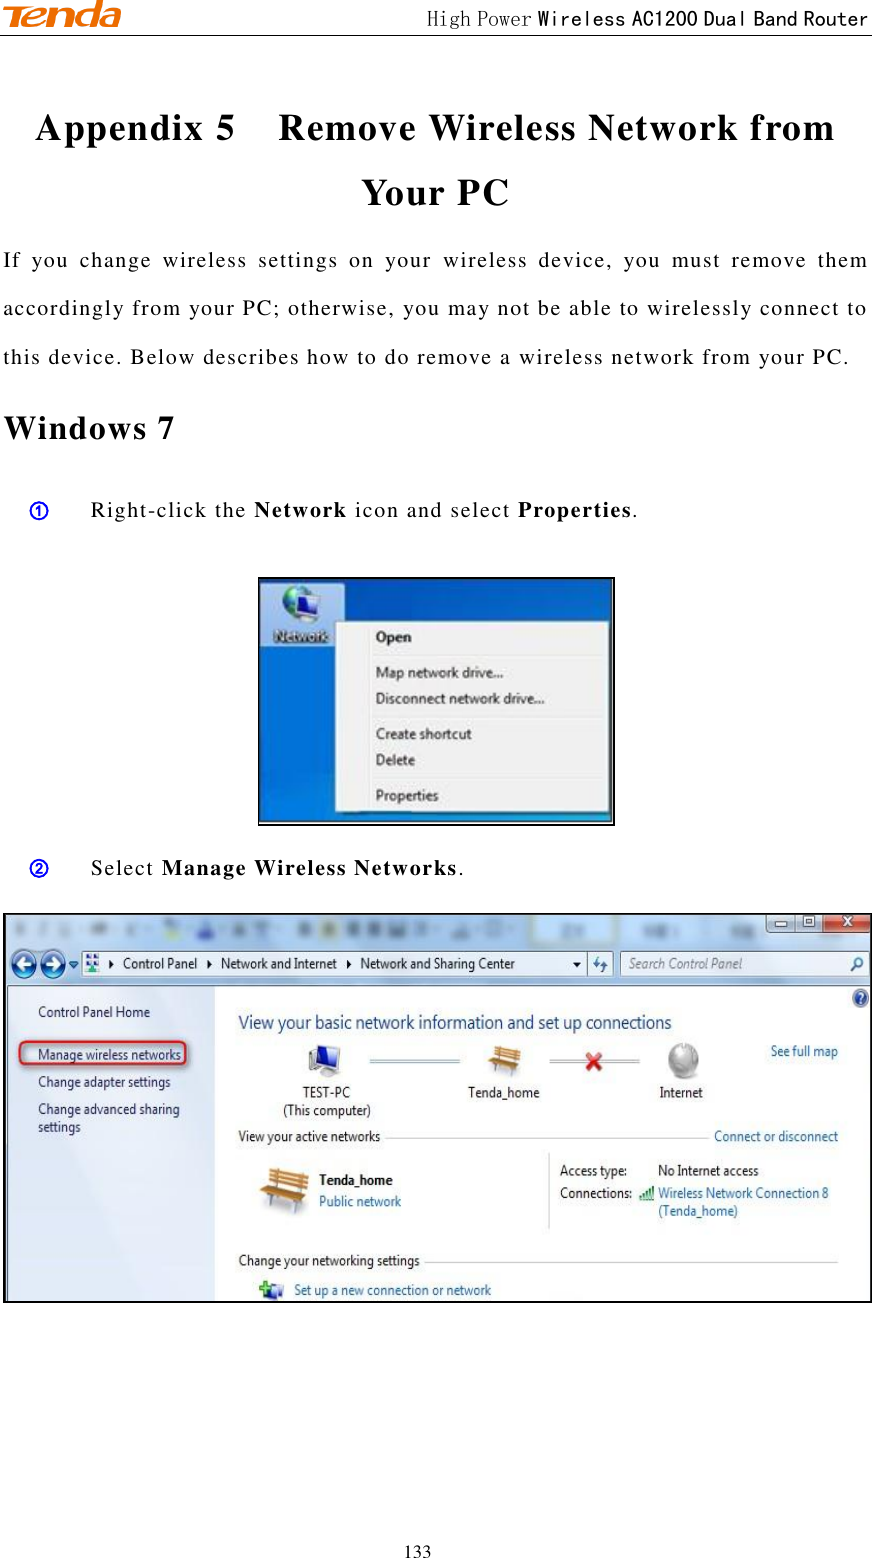                                             High Power Wireless AC1200 Dual Band Router 133 Appendix 5  Remove Wireless Network from Your PC If  you  change  wireless  settings  on  your  wireless  device,  you  must  remove  them accordingly from your PC; otherwise, you may not be able to wirelessly connect to this device. Below describes how to do remove a wireless network from your PC. Windows 7 ① Right-click the Network icon and select Properties.   ② Select Manage Wireless Networks.  